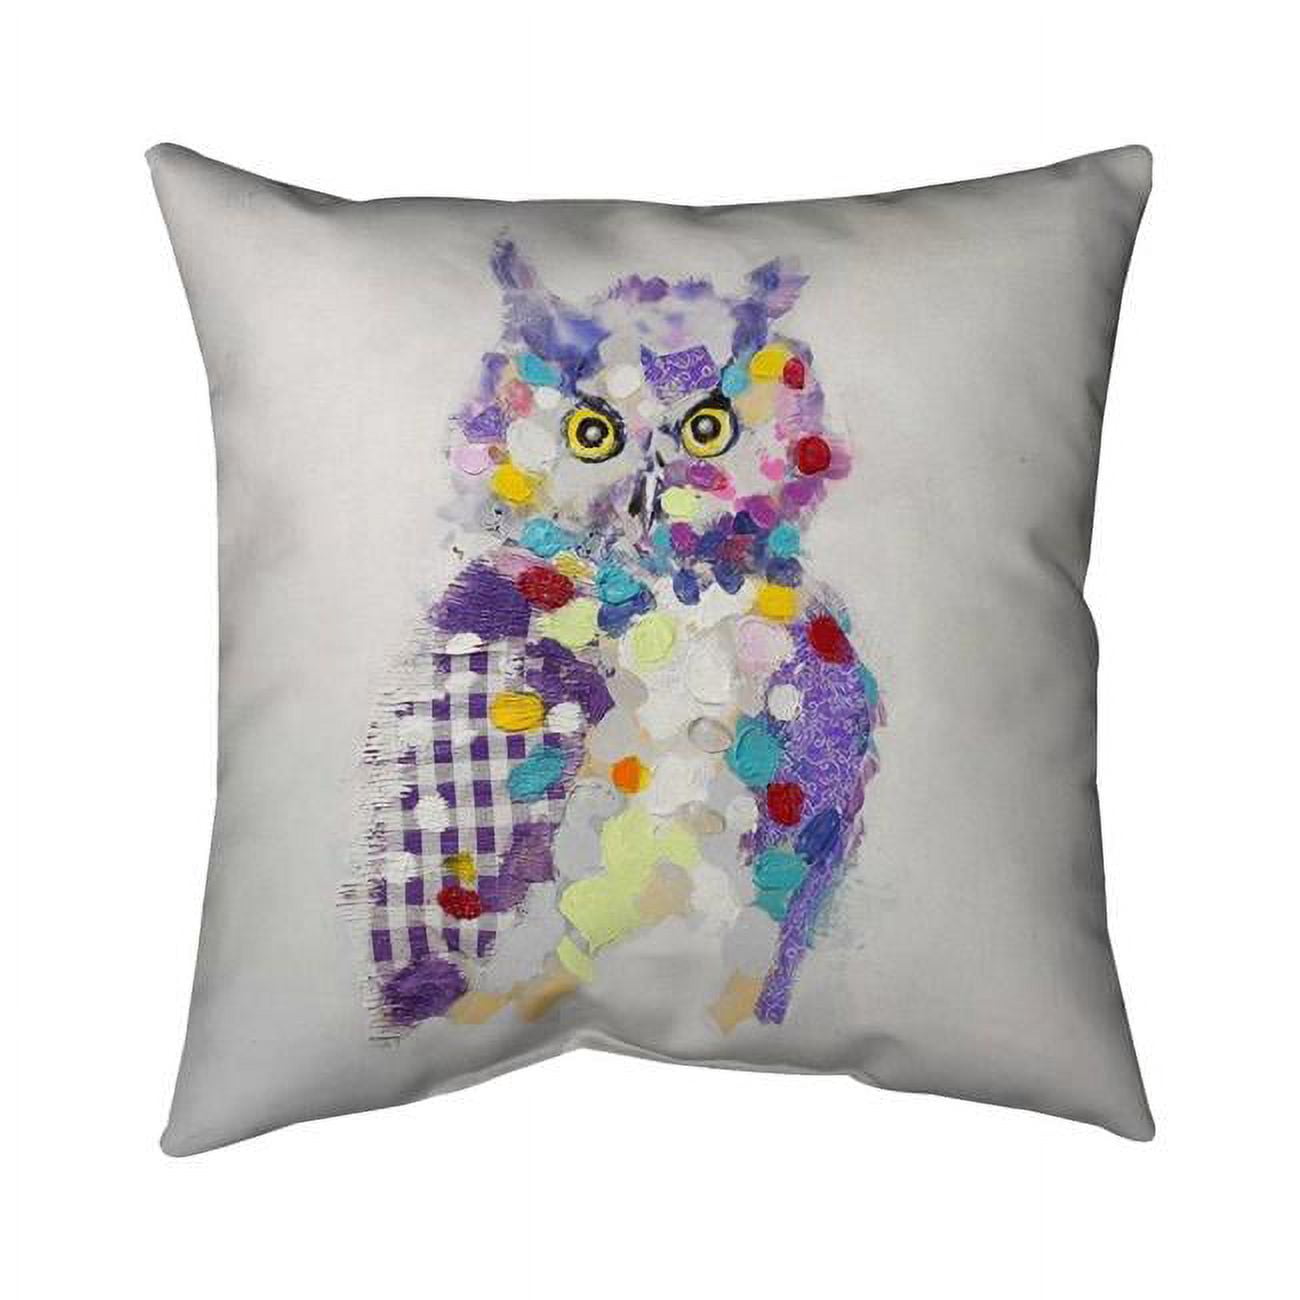 Begin Home Decor 5543-2626-AN46 26 x 26 in. Textured Abstract Owl-Double Sided Print Indoor Pillow Cover